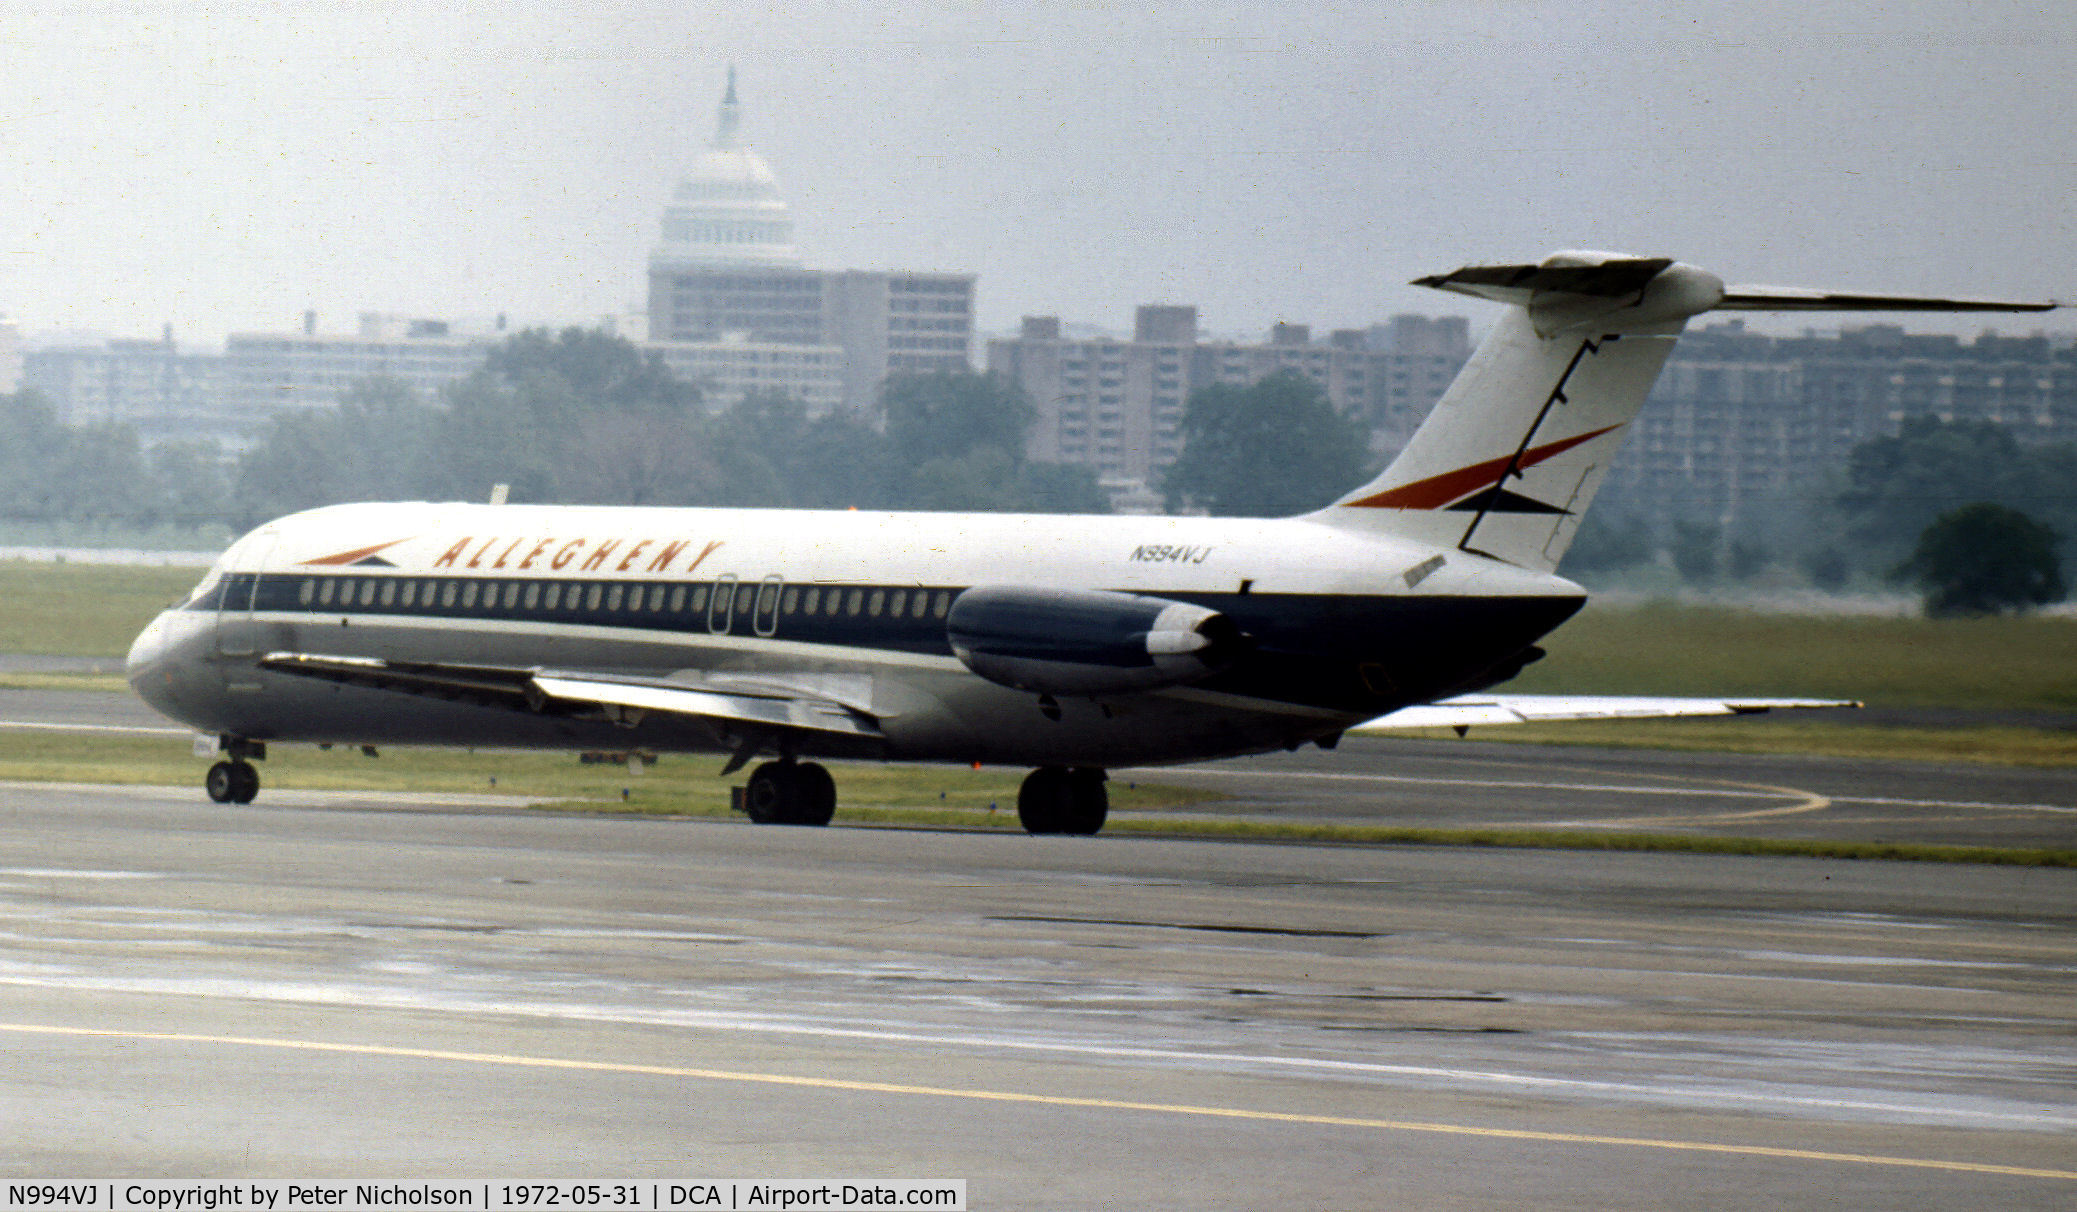 N994VJ, 1969 Douglas DC-9-31 C/N 47333, DC-9-31 of Allegheny Airlines preparing to depart from what was then known as National Airport in May 1972.